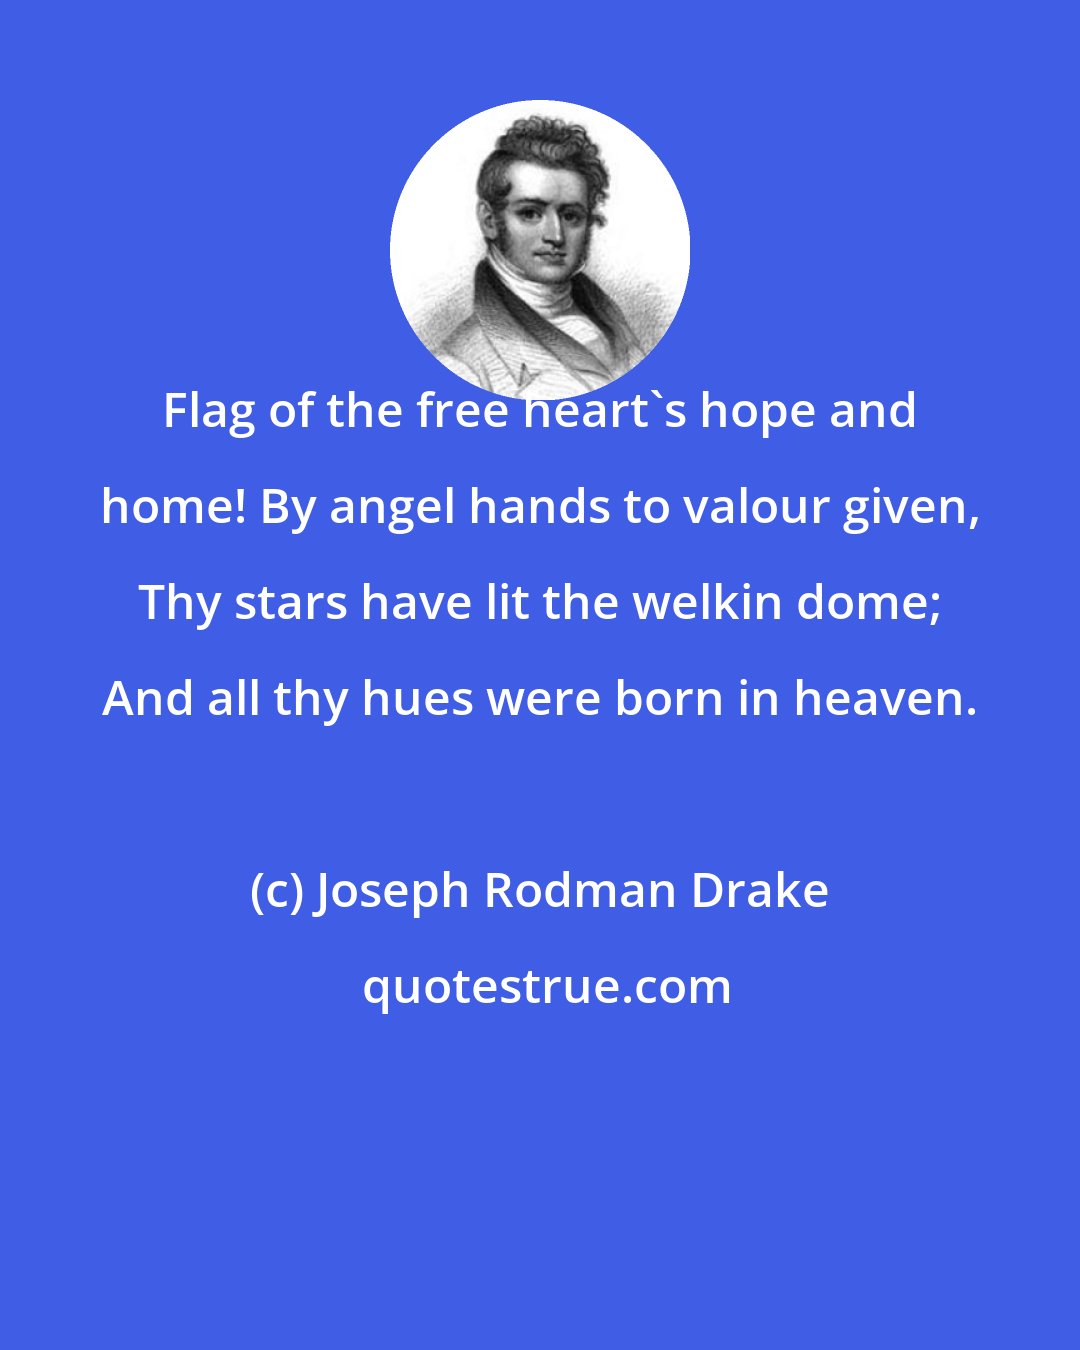 Joseph Rodman Drake: Flag of the free heart's hope and home! By angel hands to valour given, Thy stars have lit the welkin dome; And all thy hues were born in heaven.